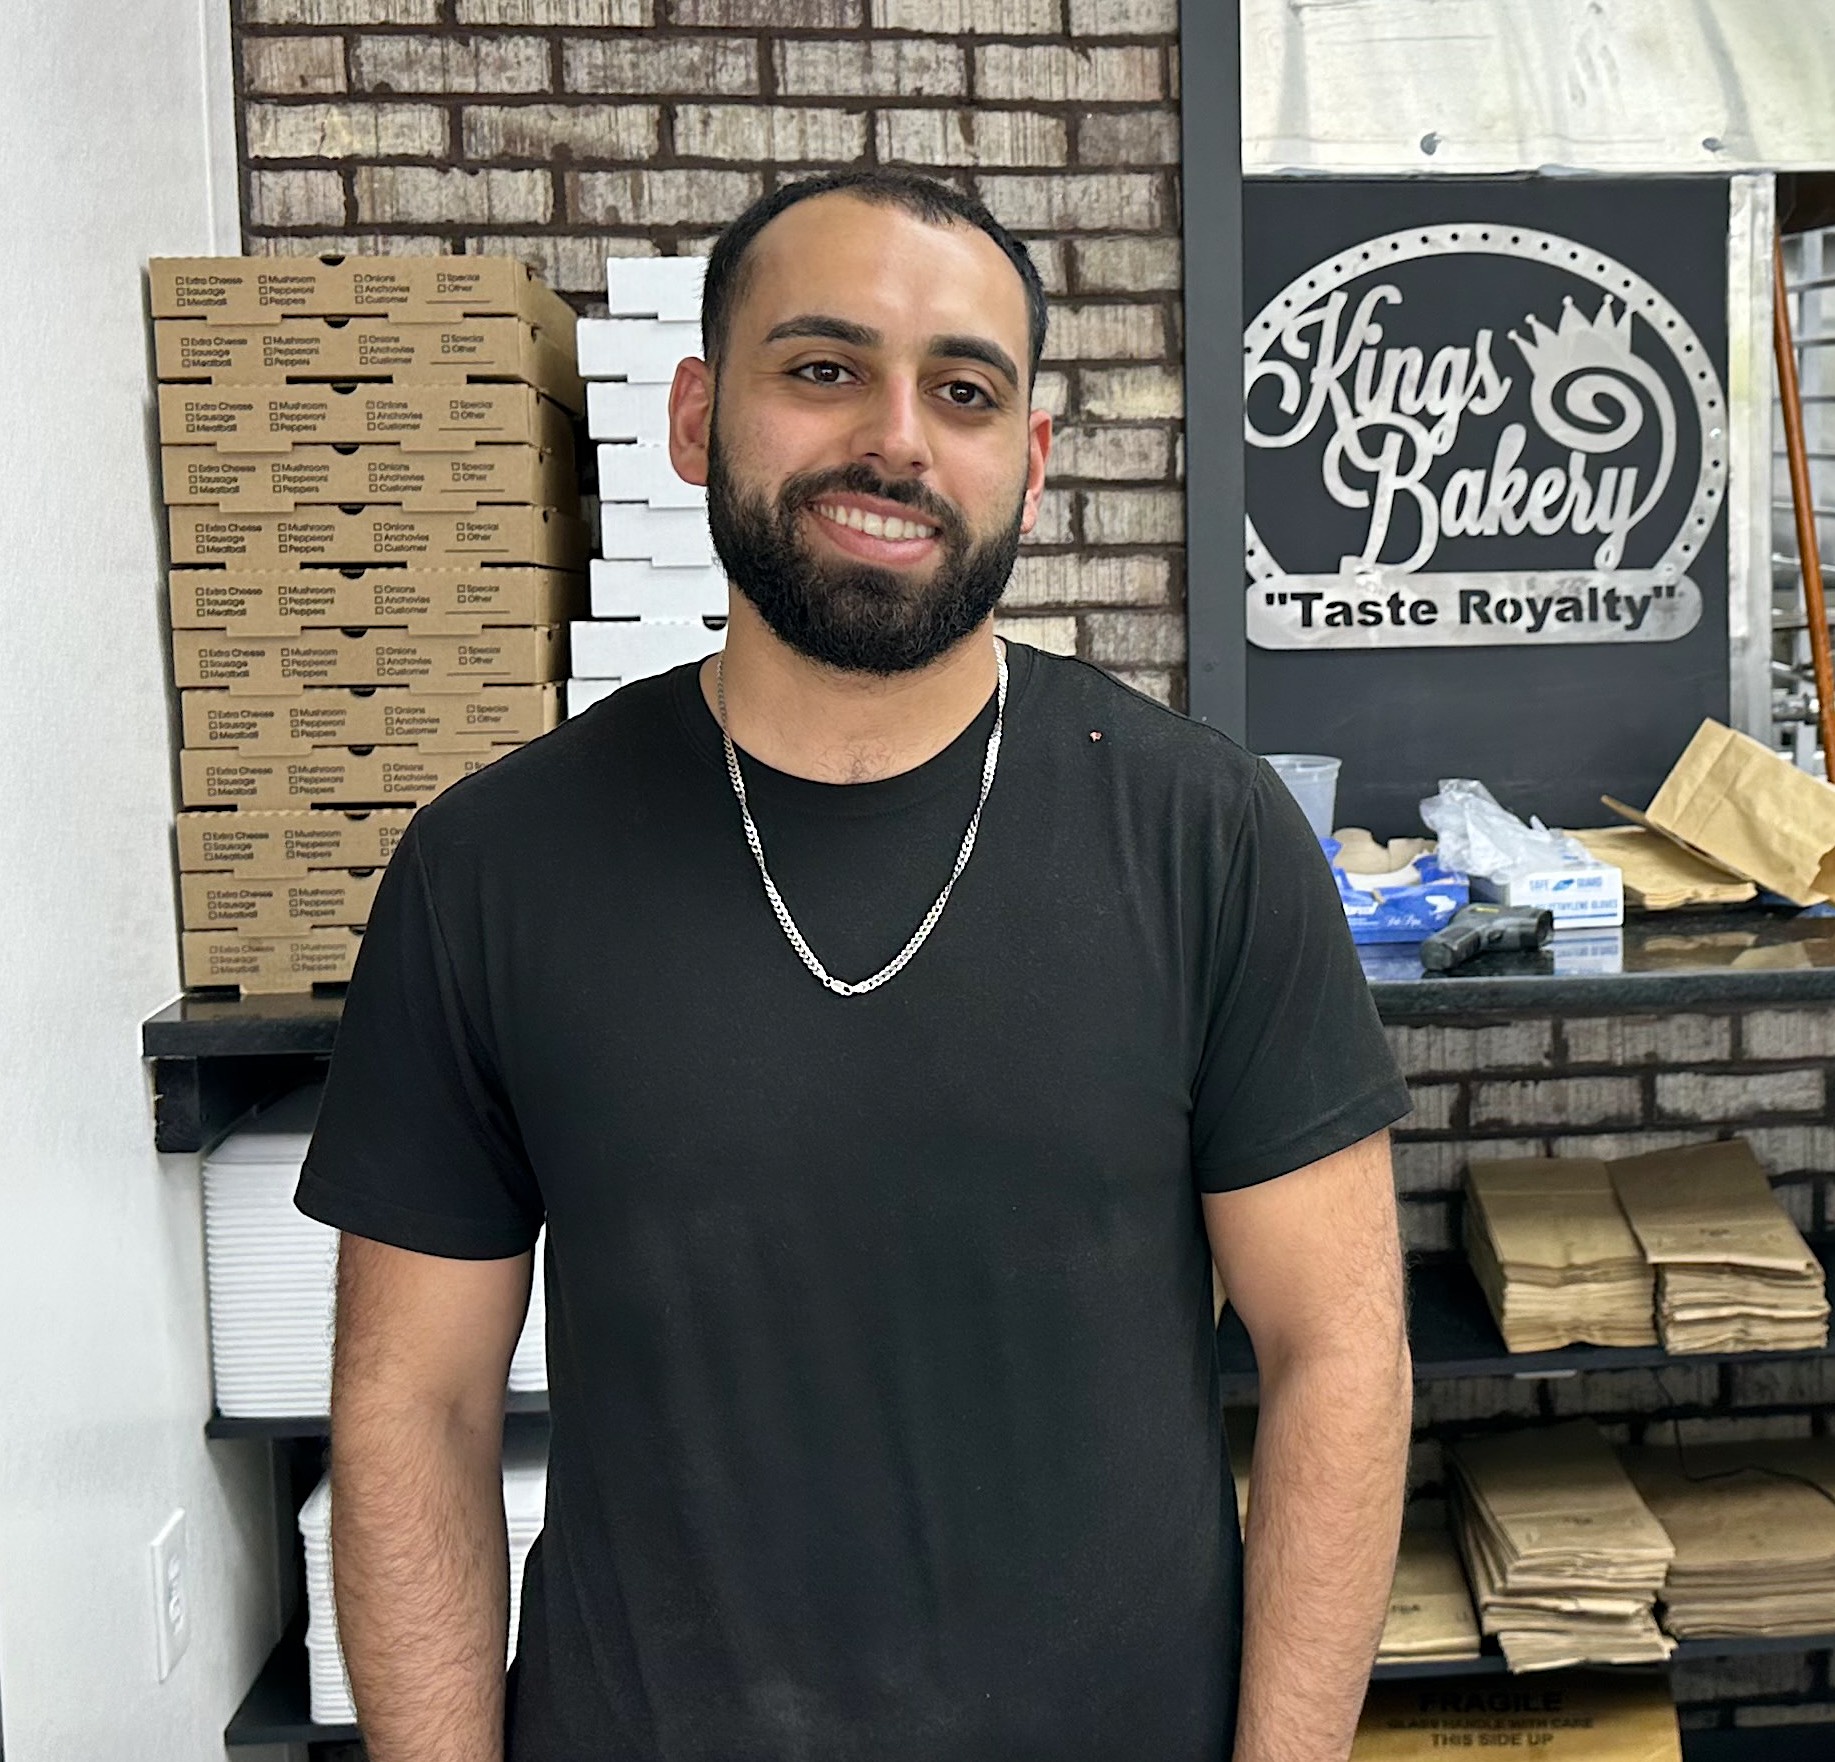 Mohamad Joumaa opened the Canton Kings Bakery four months ago